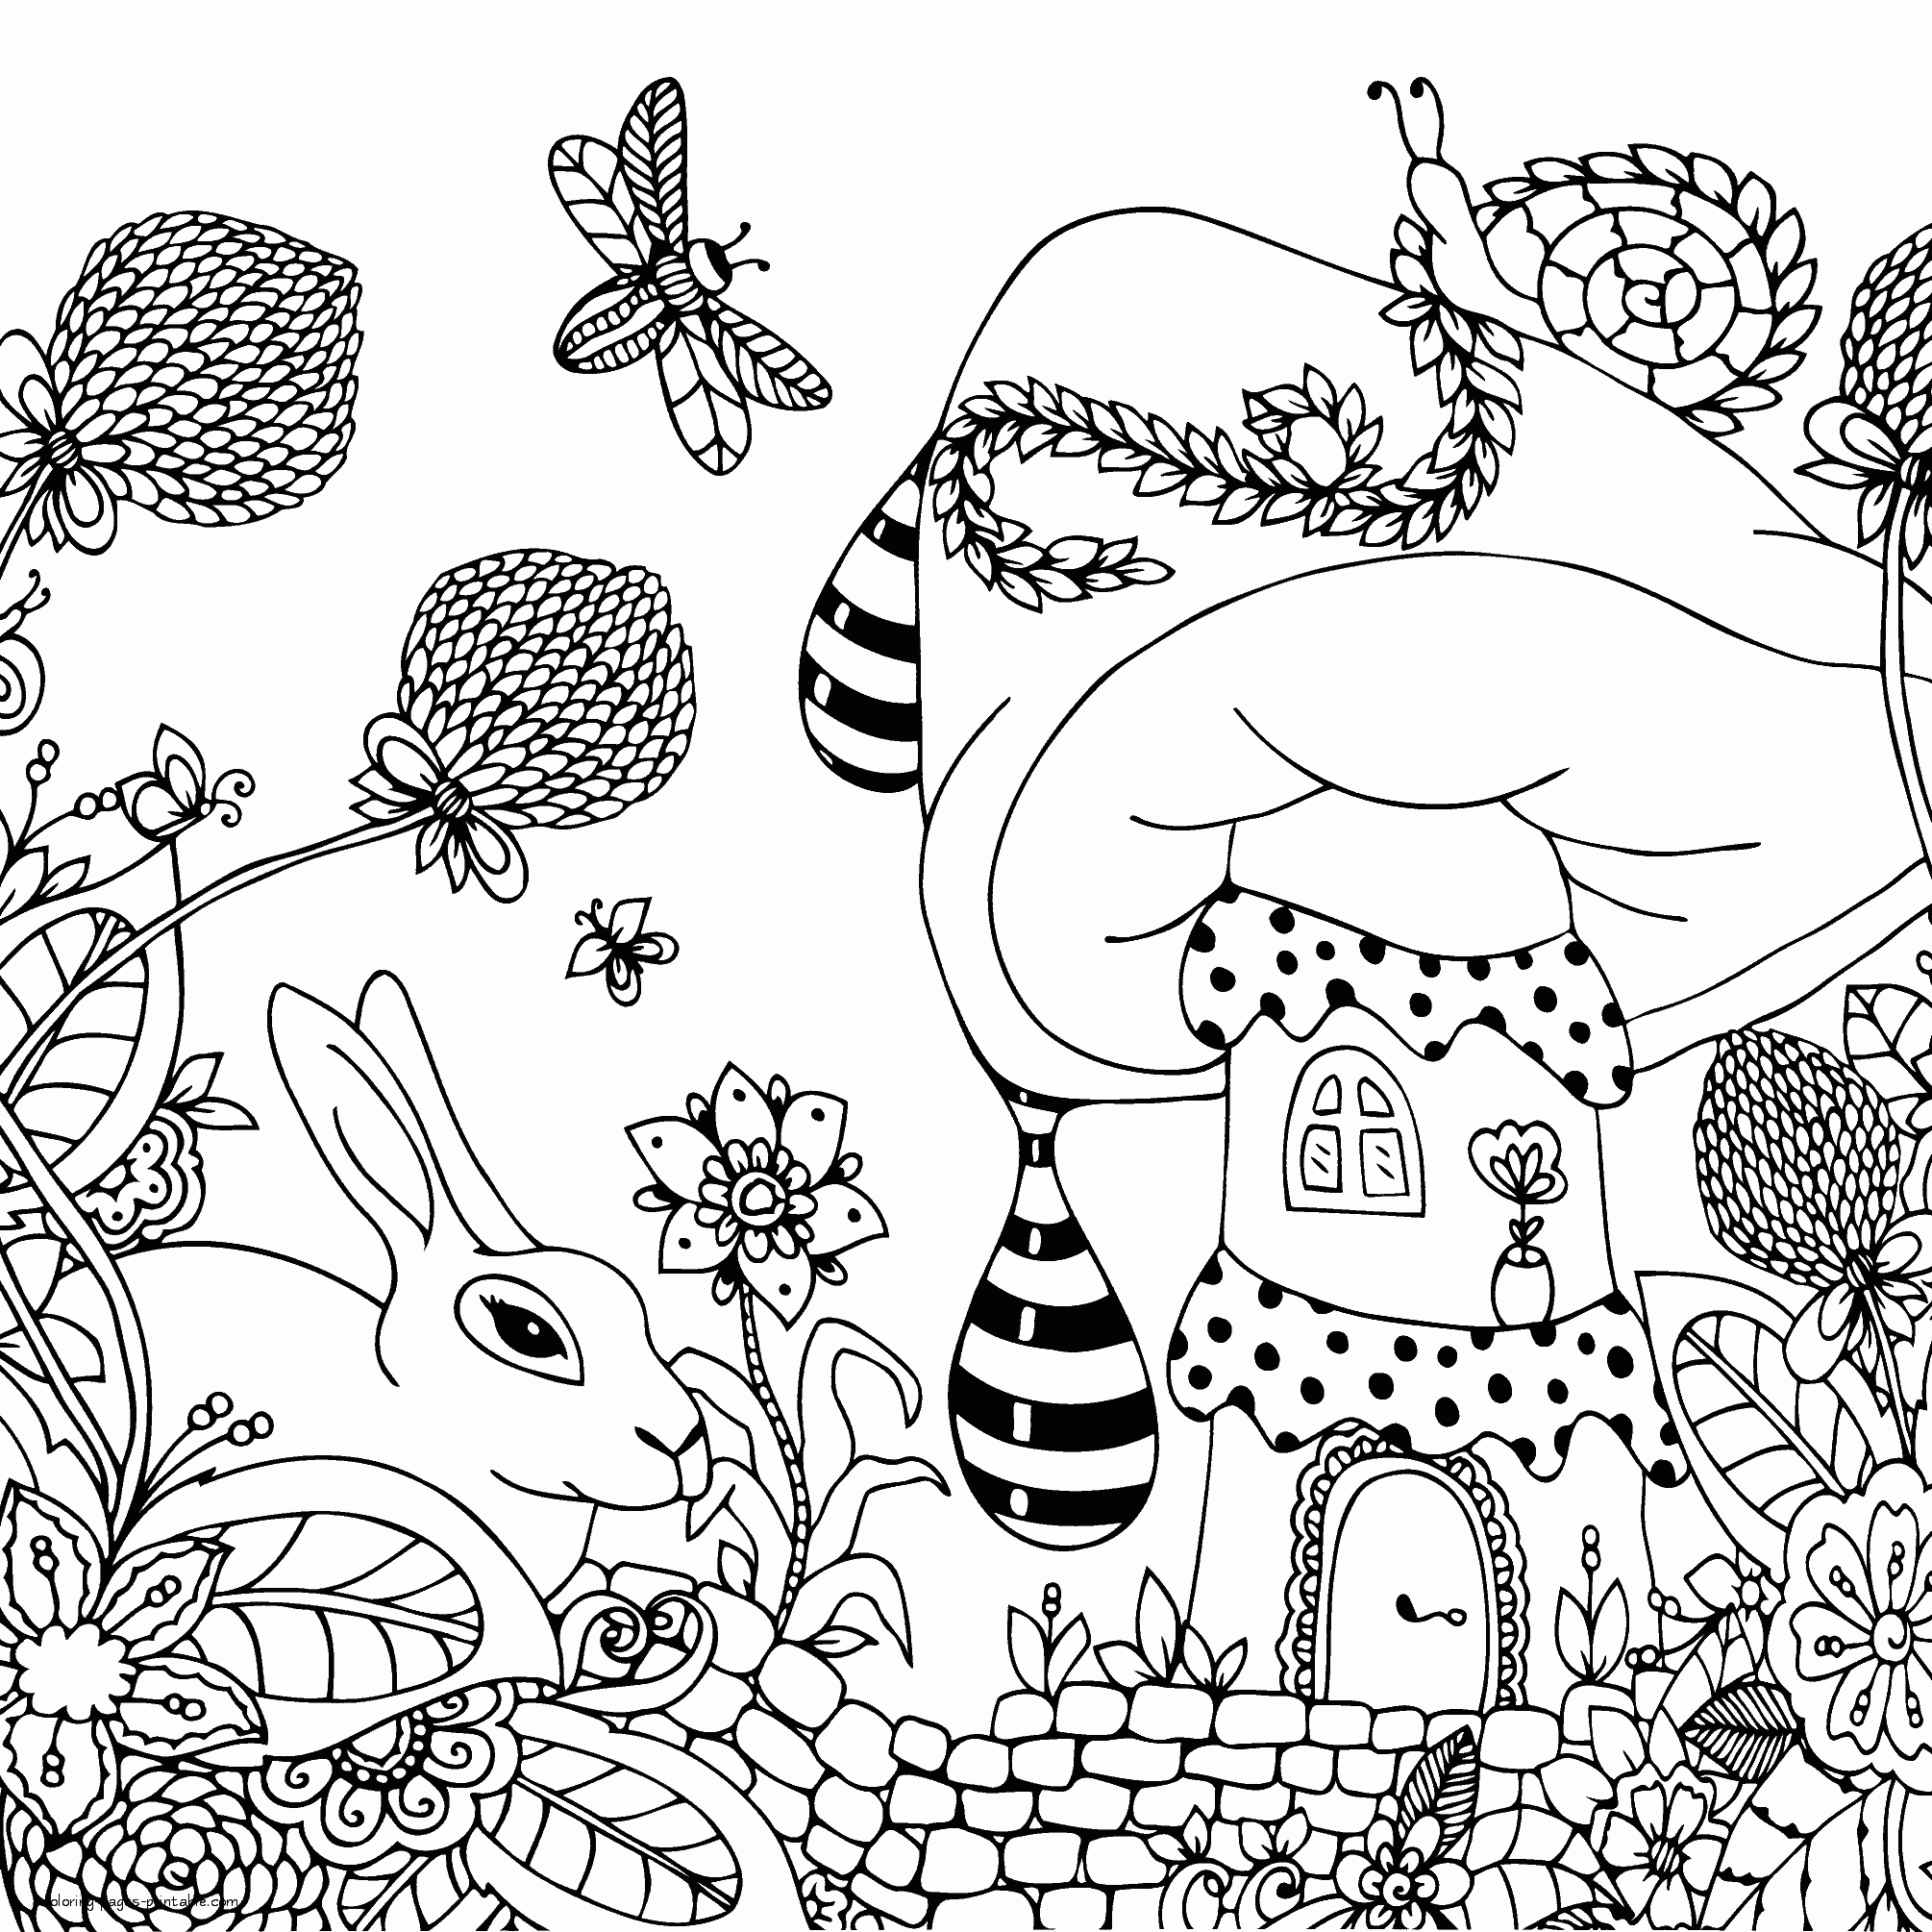 Rabbit Coloring Pages For Adults || COLORING-PAGES-PRINTABLE.COM